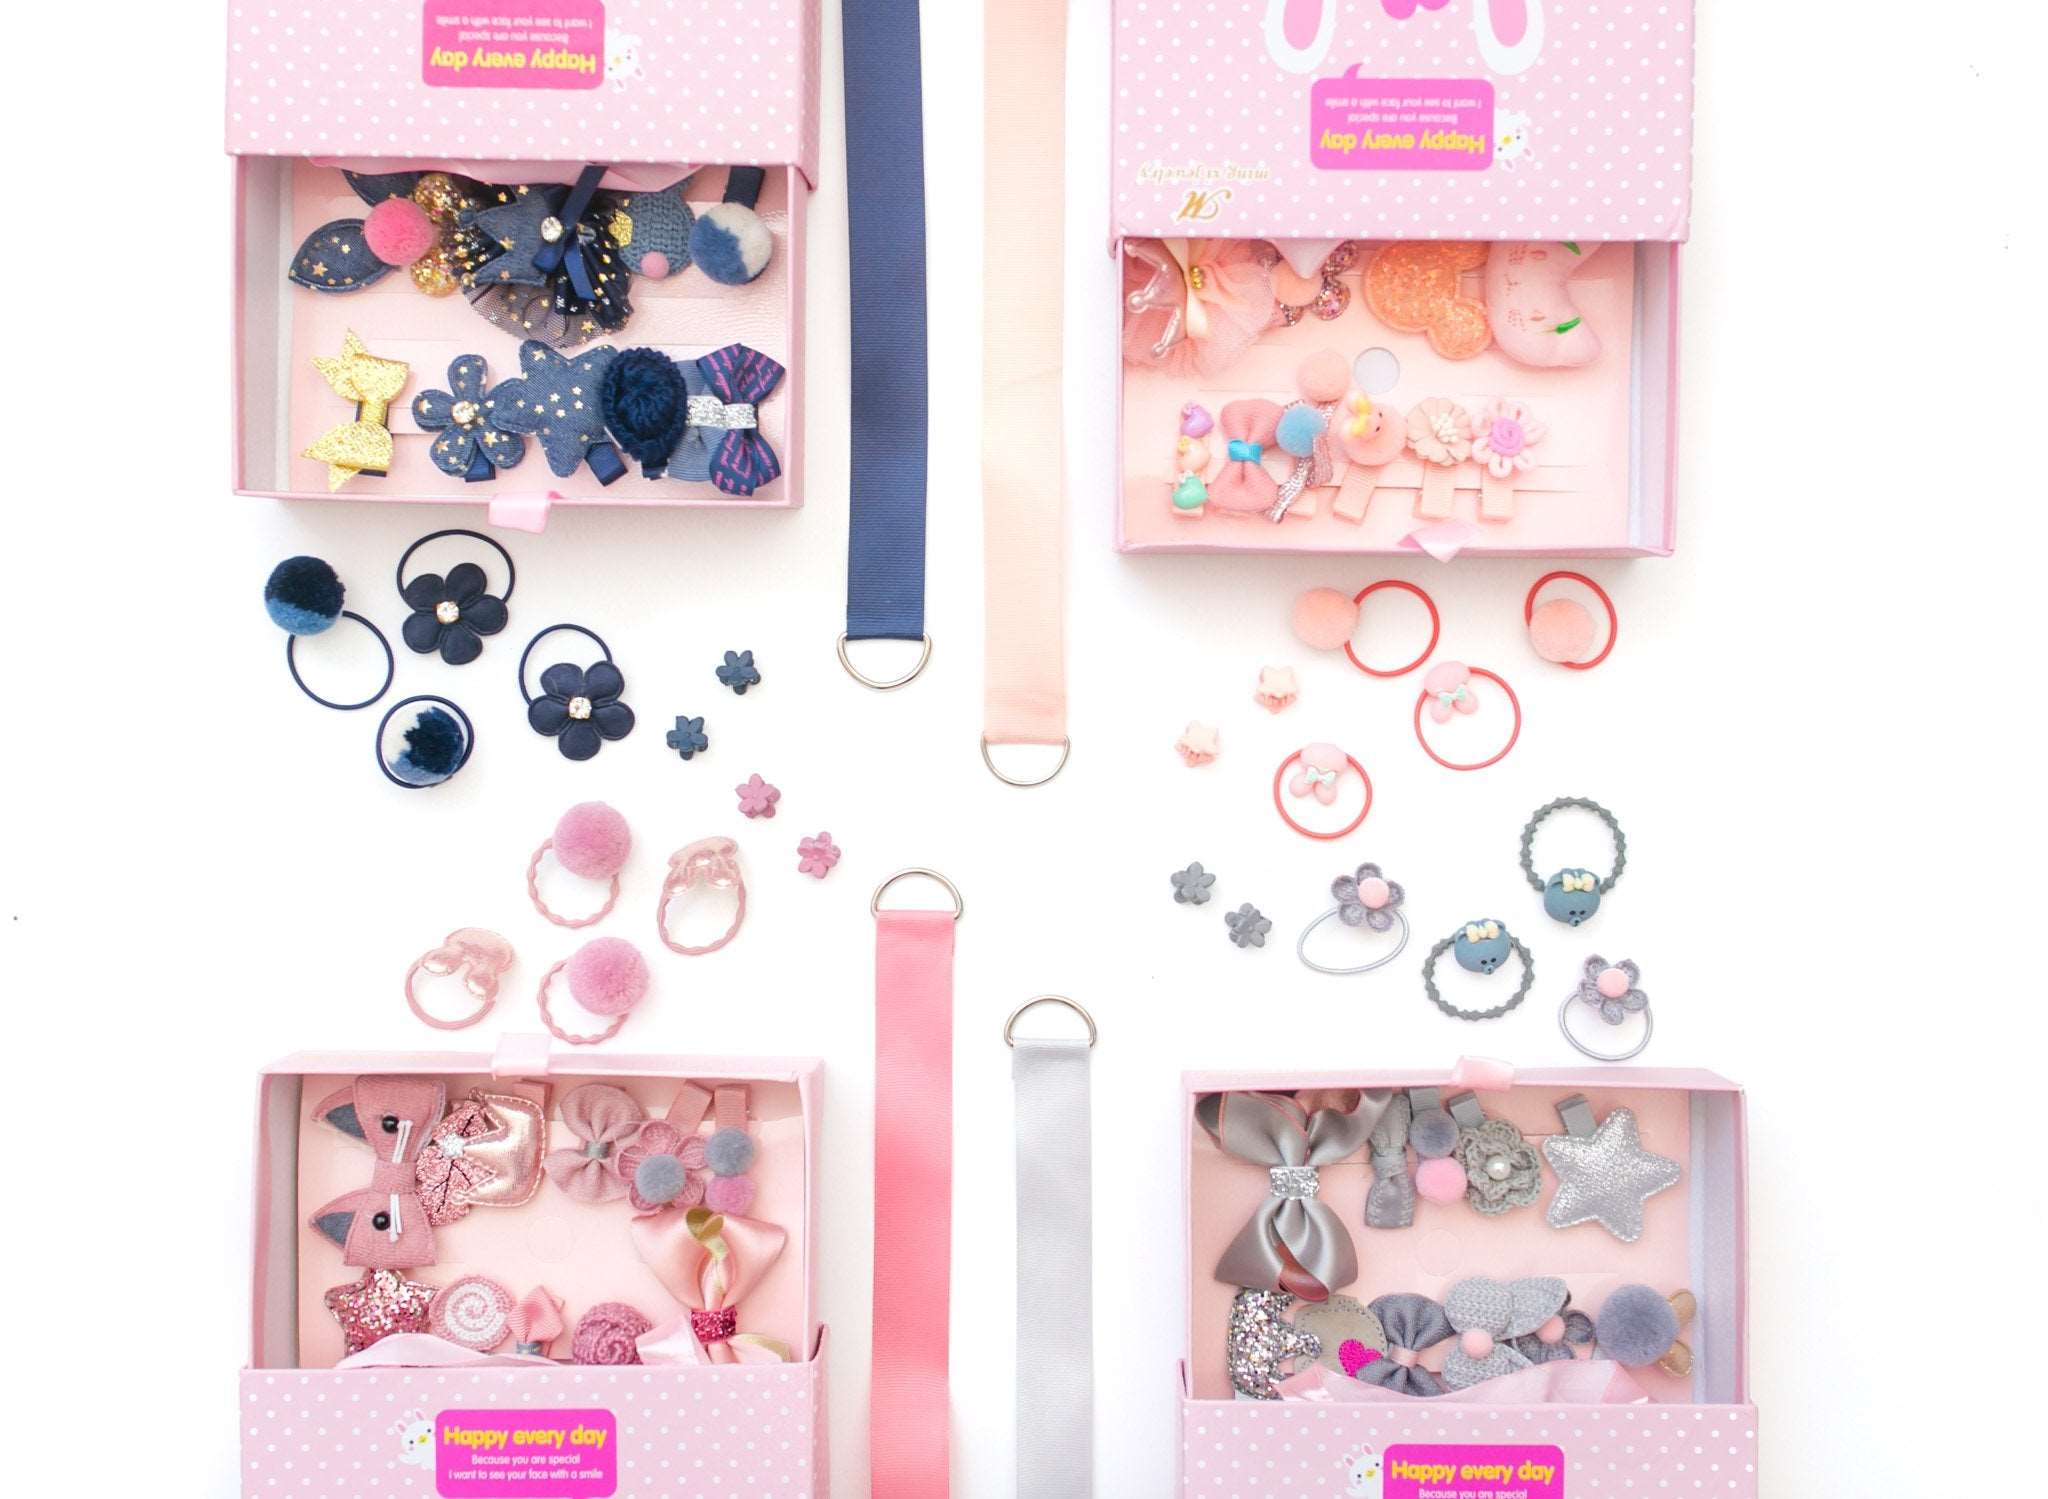 Nfin8 Little Charmers: 18-Piece Hair Accessory Gift Box for All Ages